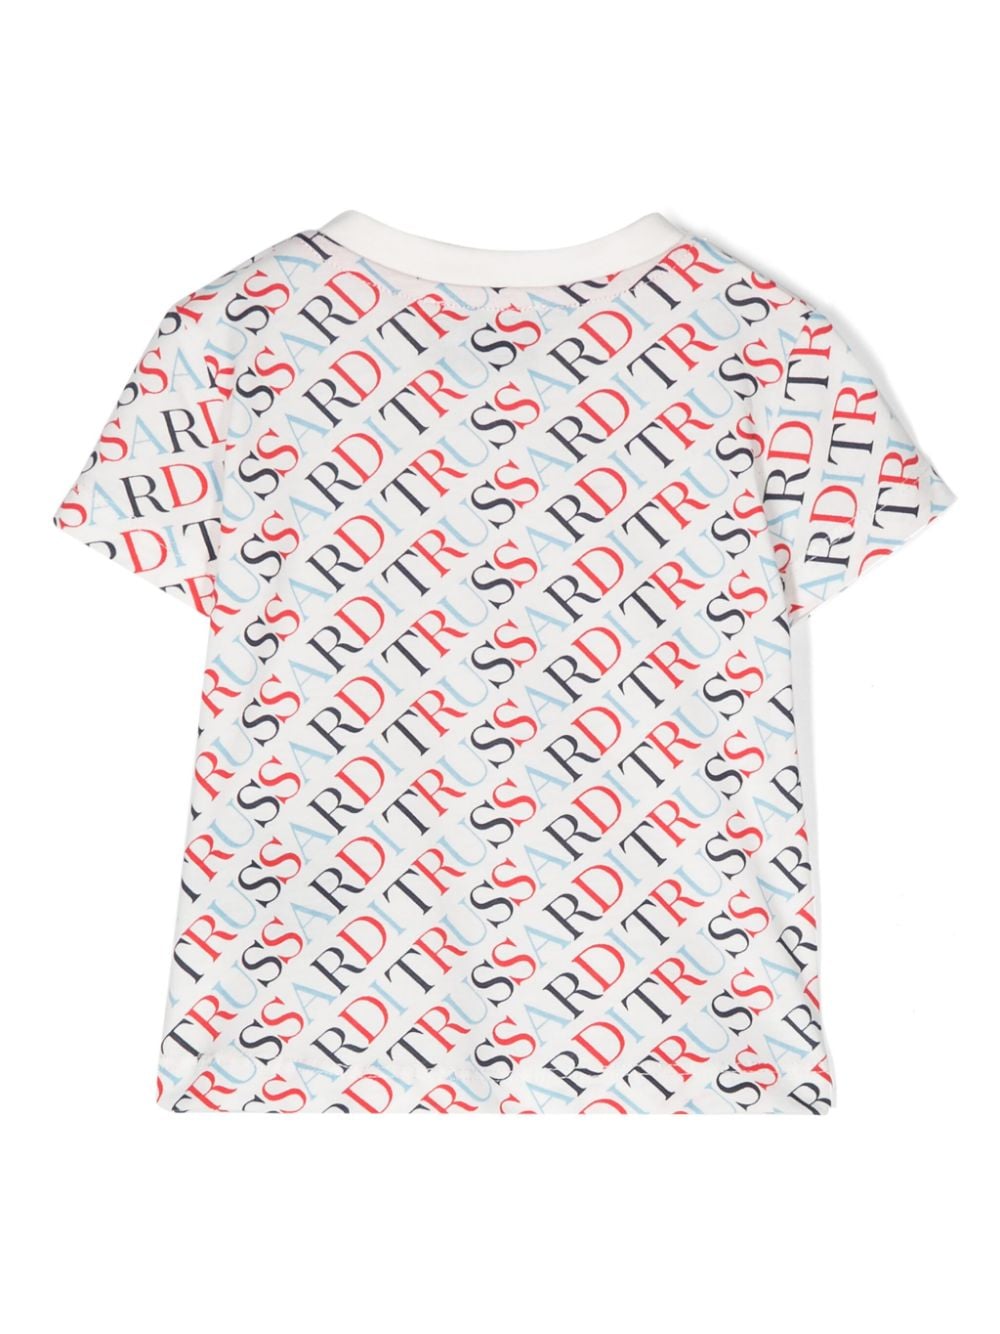 White baby t-shirt with all-over logo